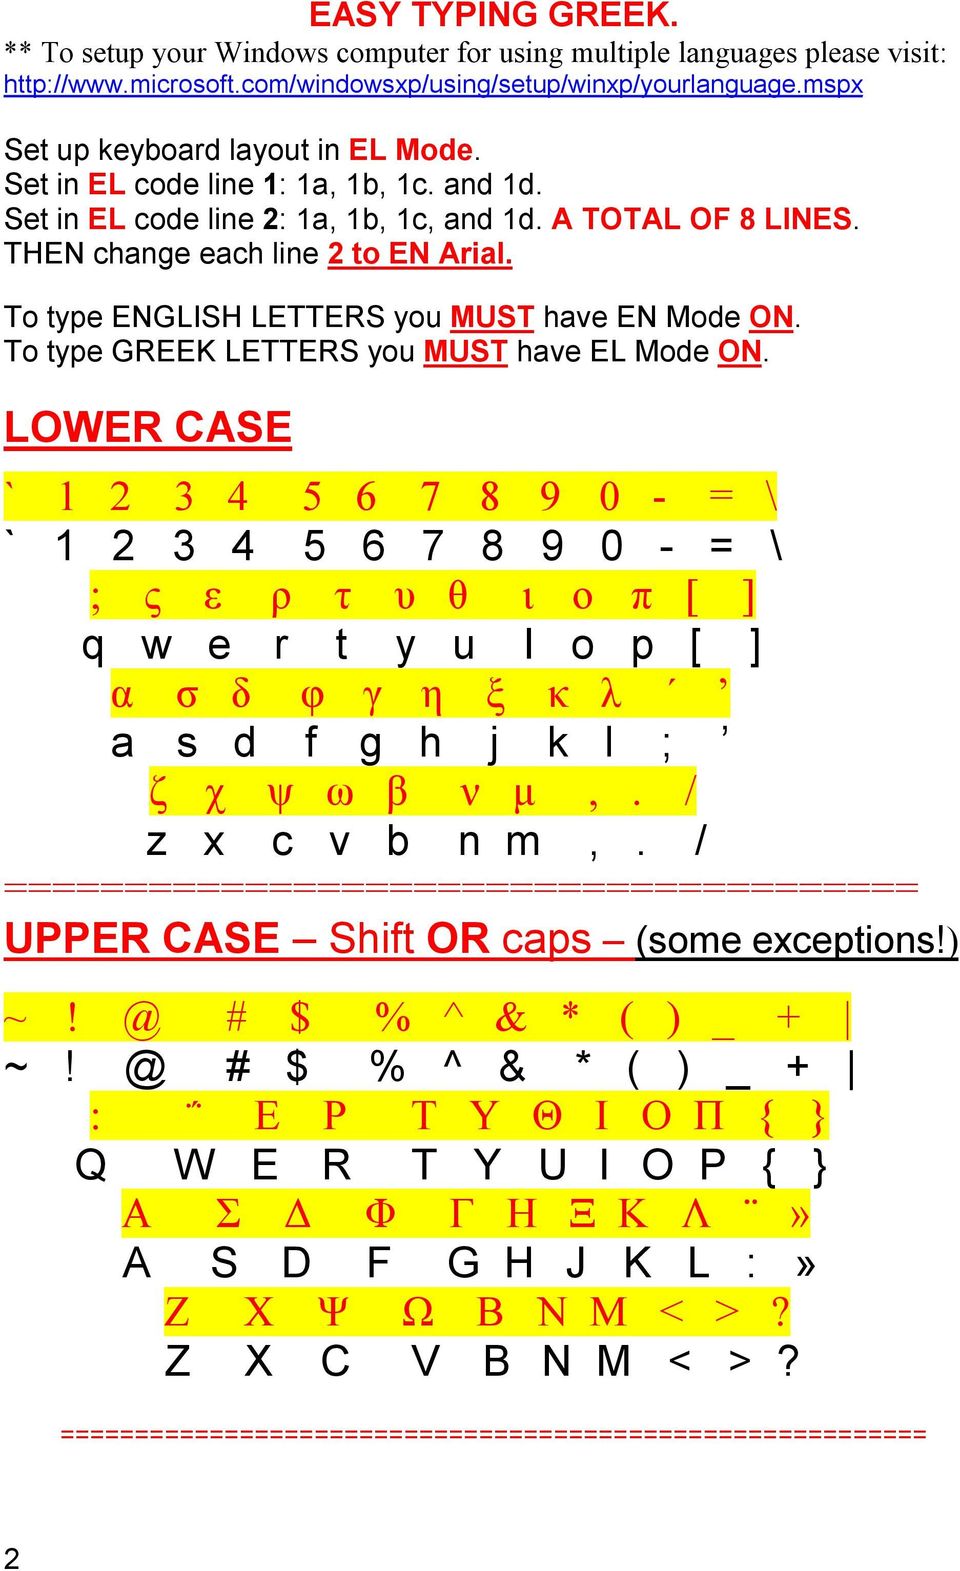 To type ENGLISH LETTERS you MUST have EN Mode ON. To type GREEK LETTERS you MUST have EL Mode ON.